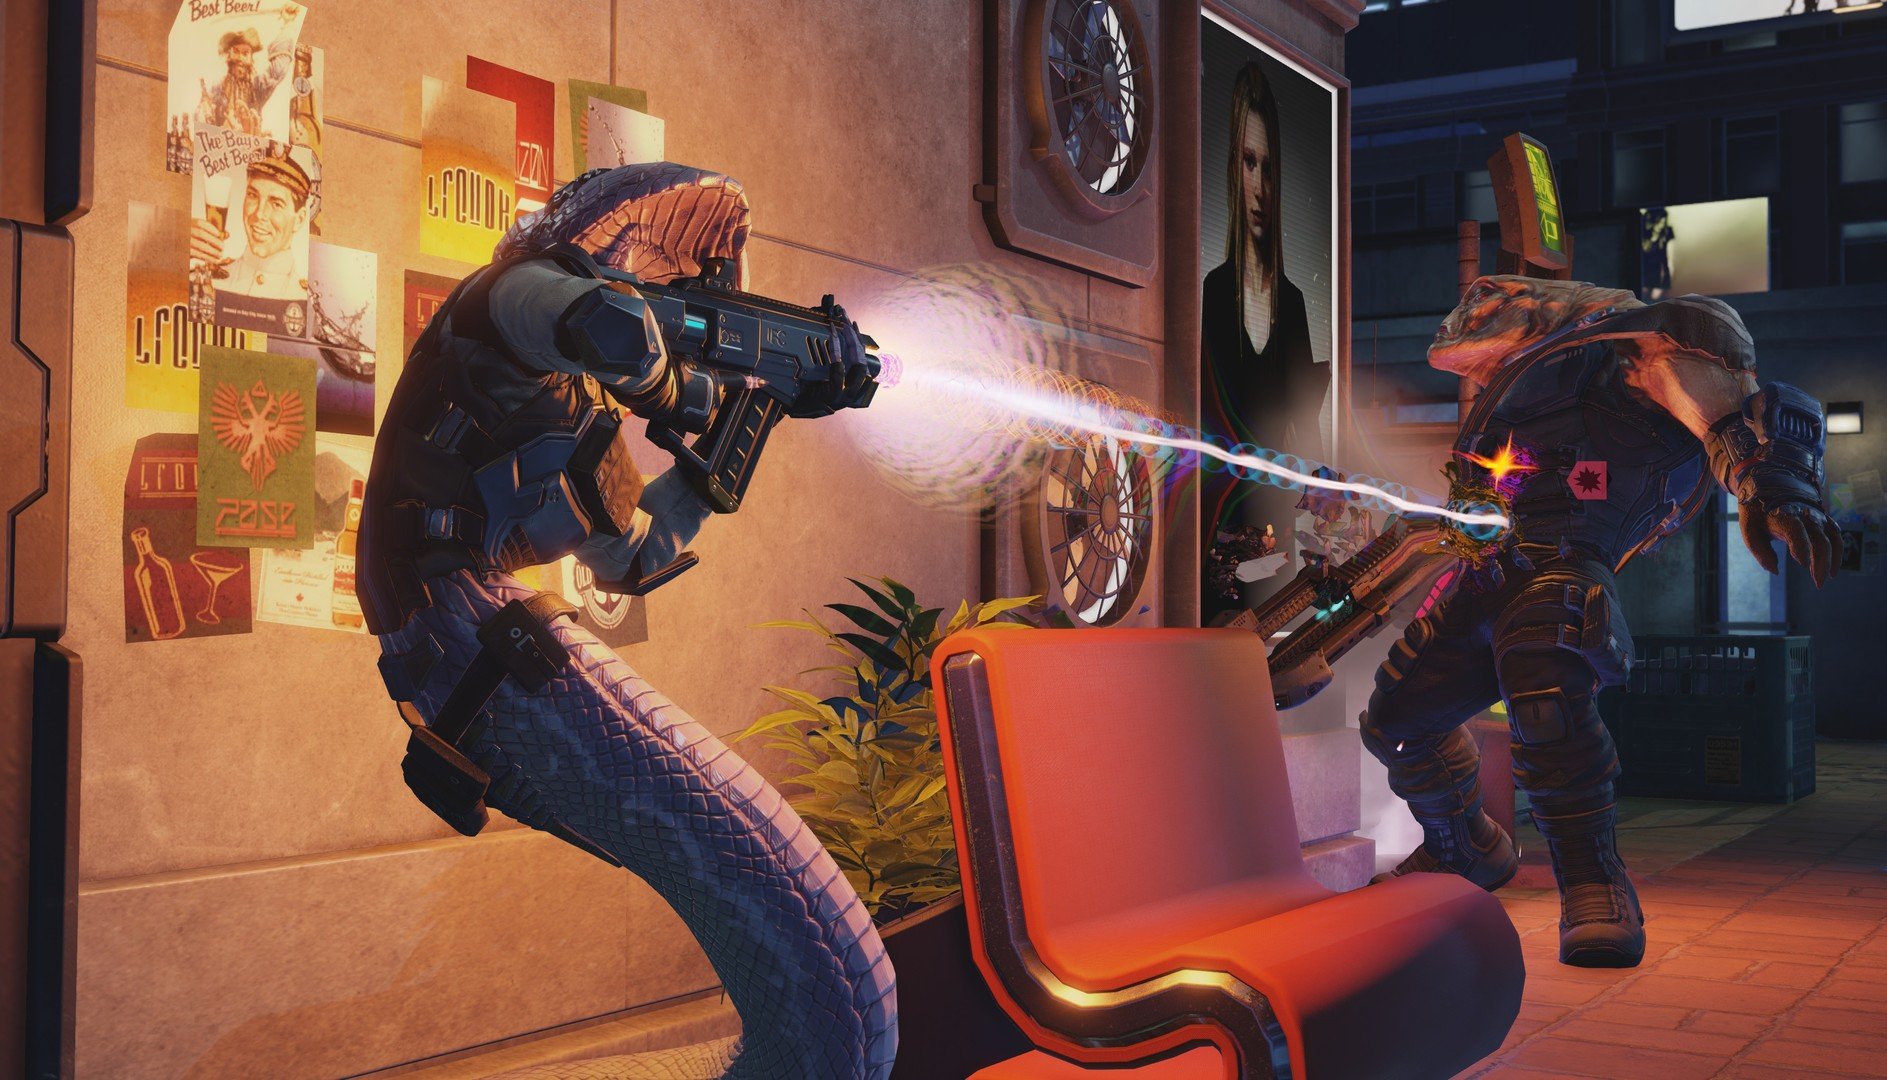  XCOM: Chimera Squad system requirements – minimum and recommended specs 